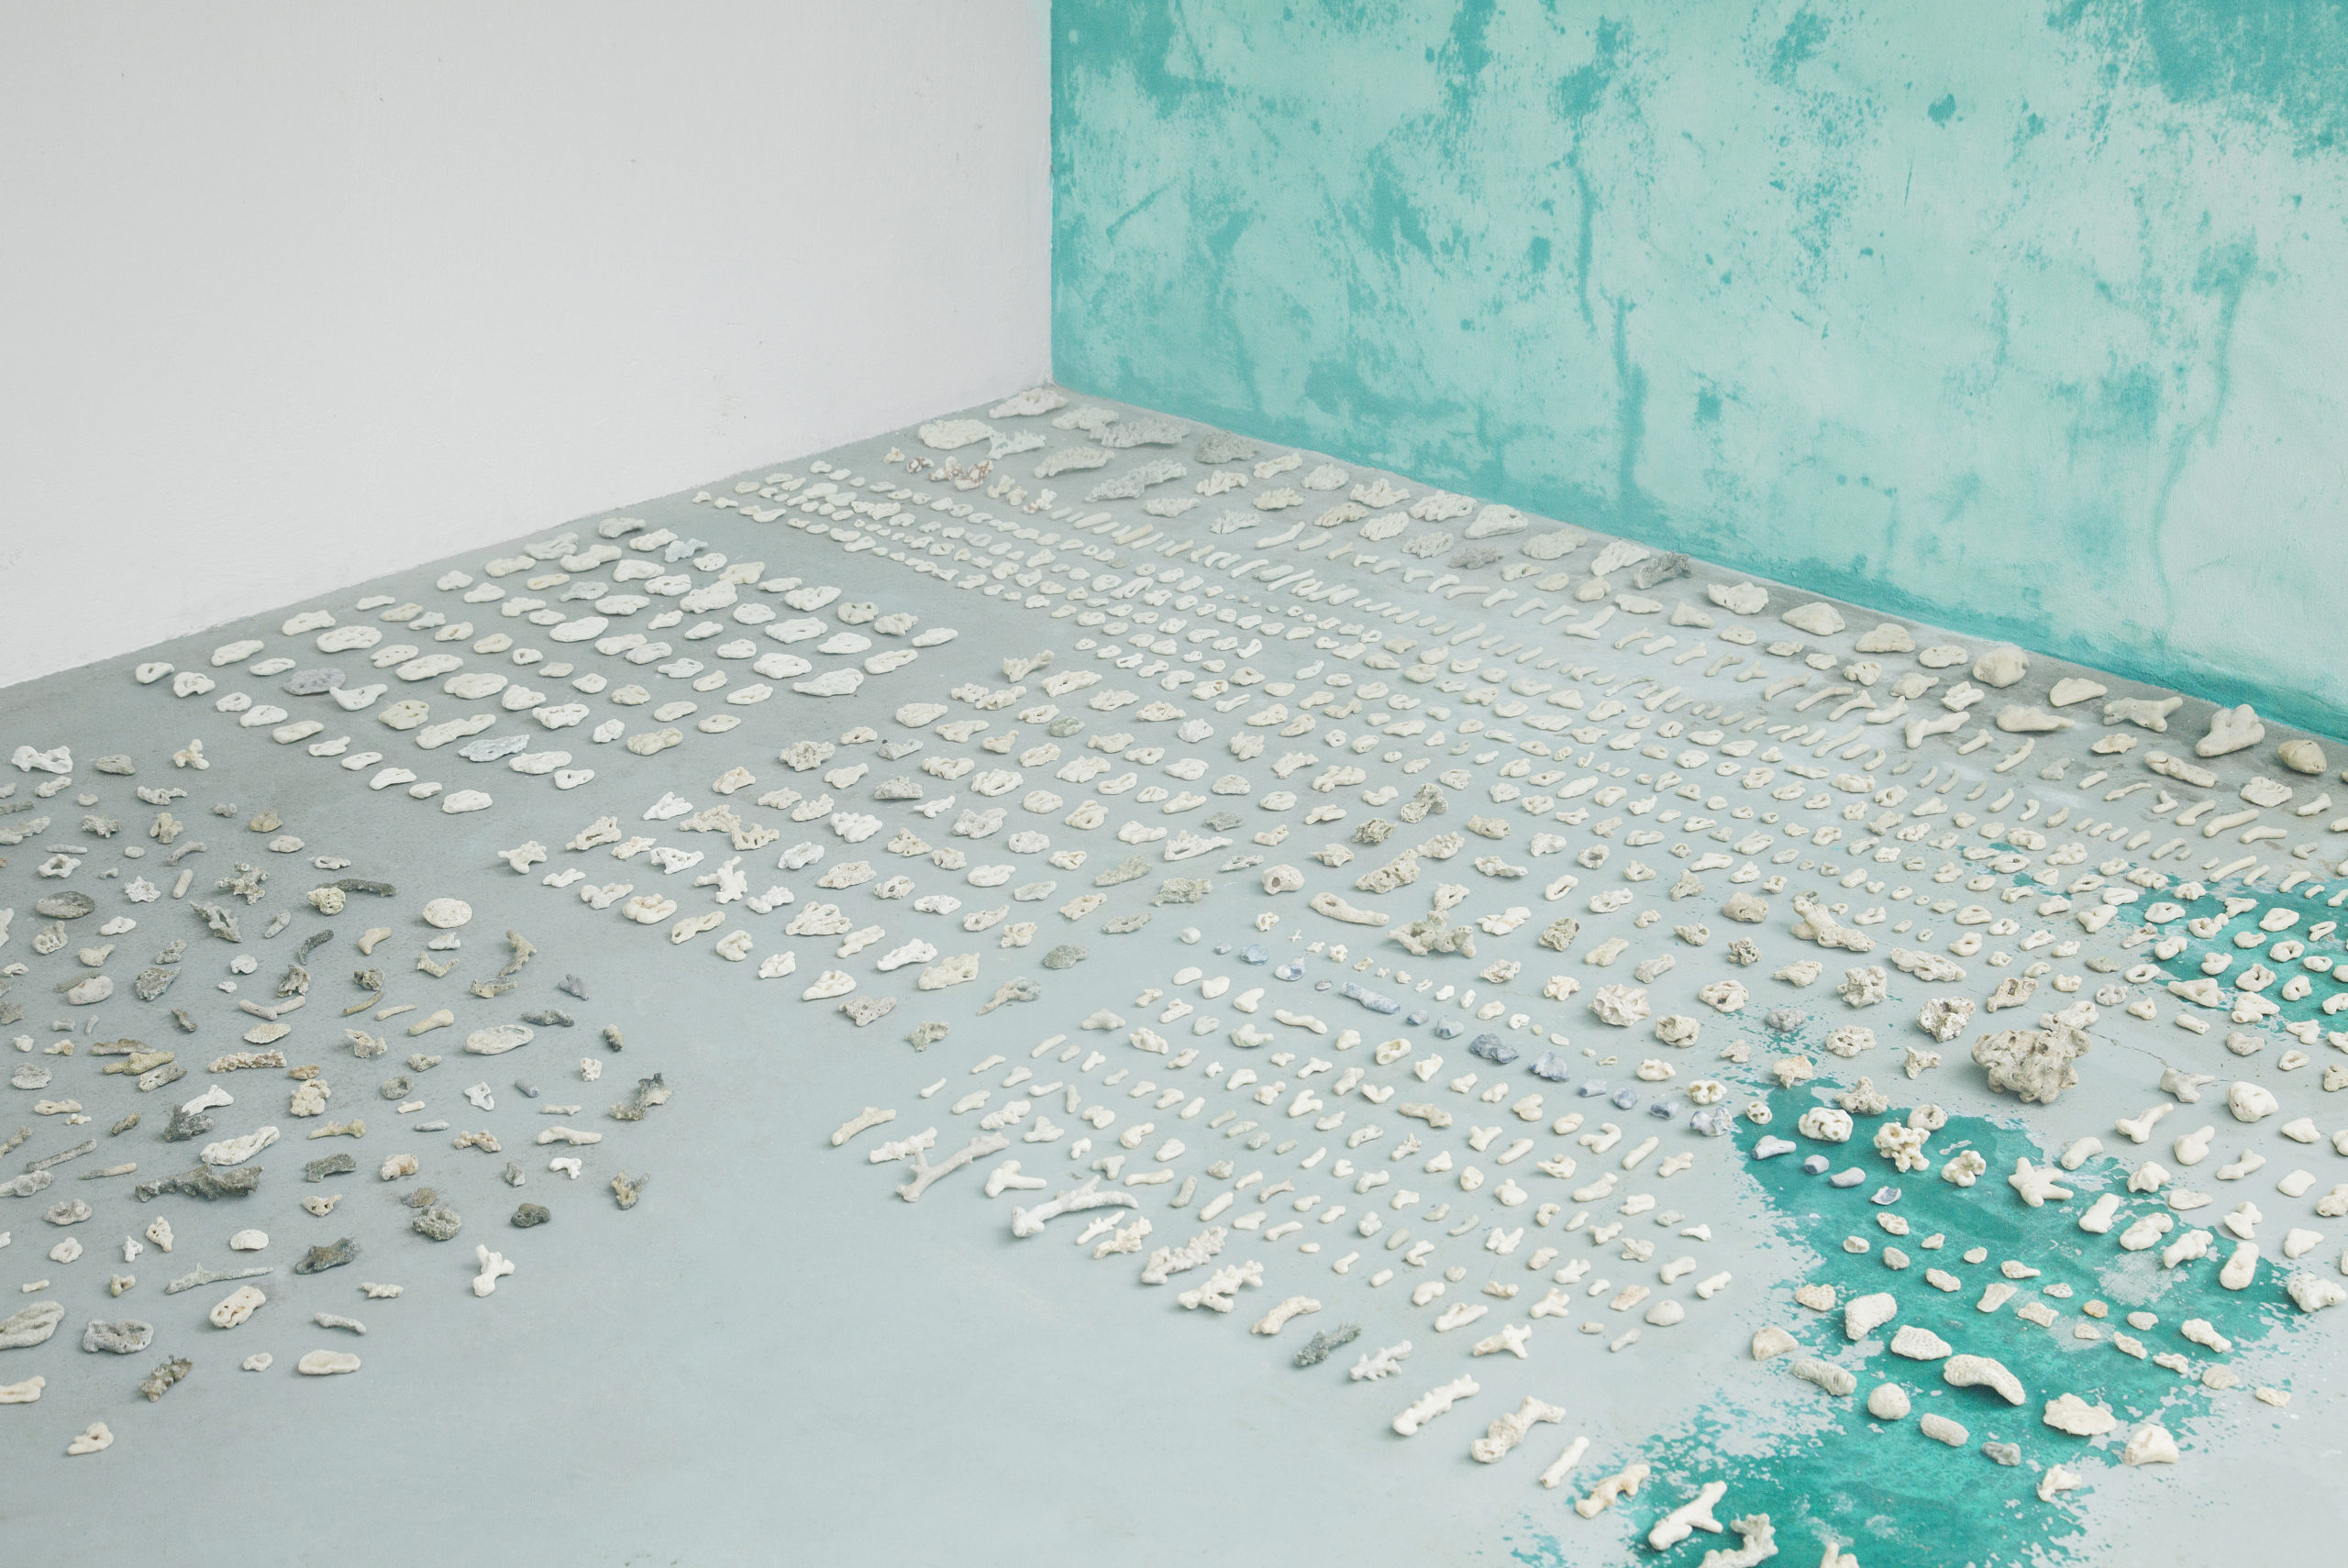 Several rows of pieces of clay on a floor in a room, one of the walls is white and the other is covered in faded turquoise paint.